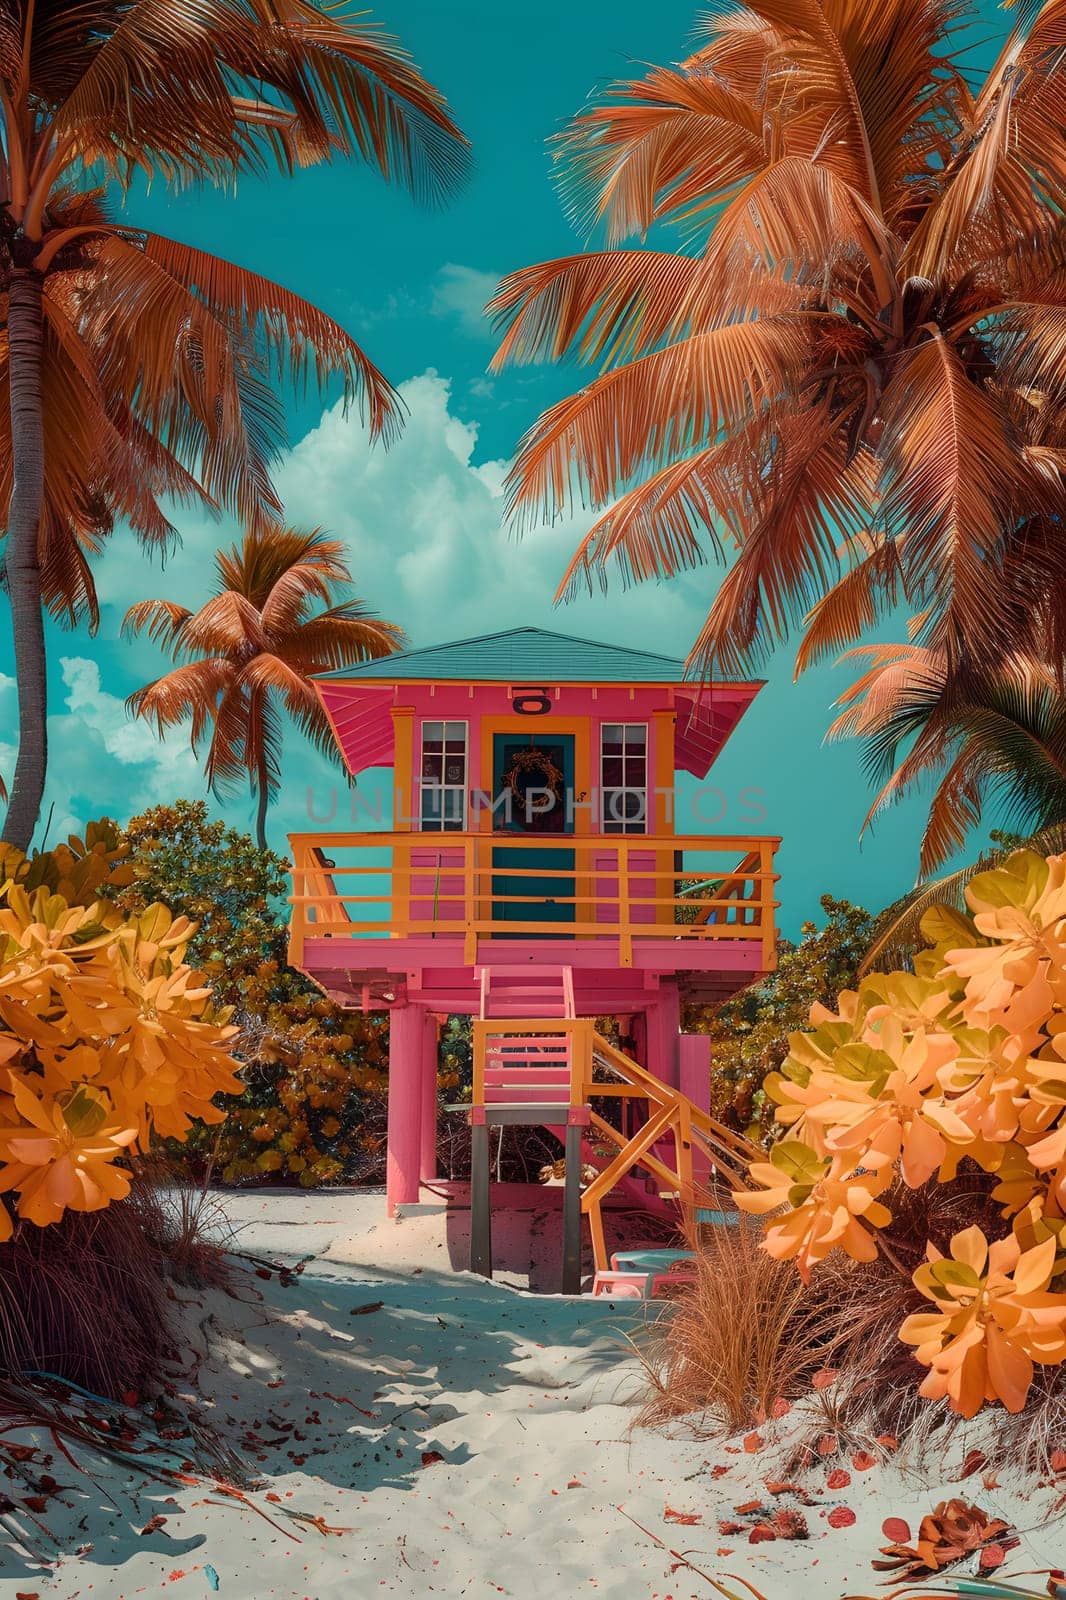 A pink and yellow lifeguard tower stands on a sandy beach, surrounded by lush palm trees. The vibrant colors stand out against the blue sky, creating a picturesque natural landscape